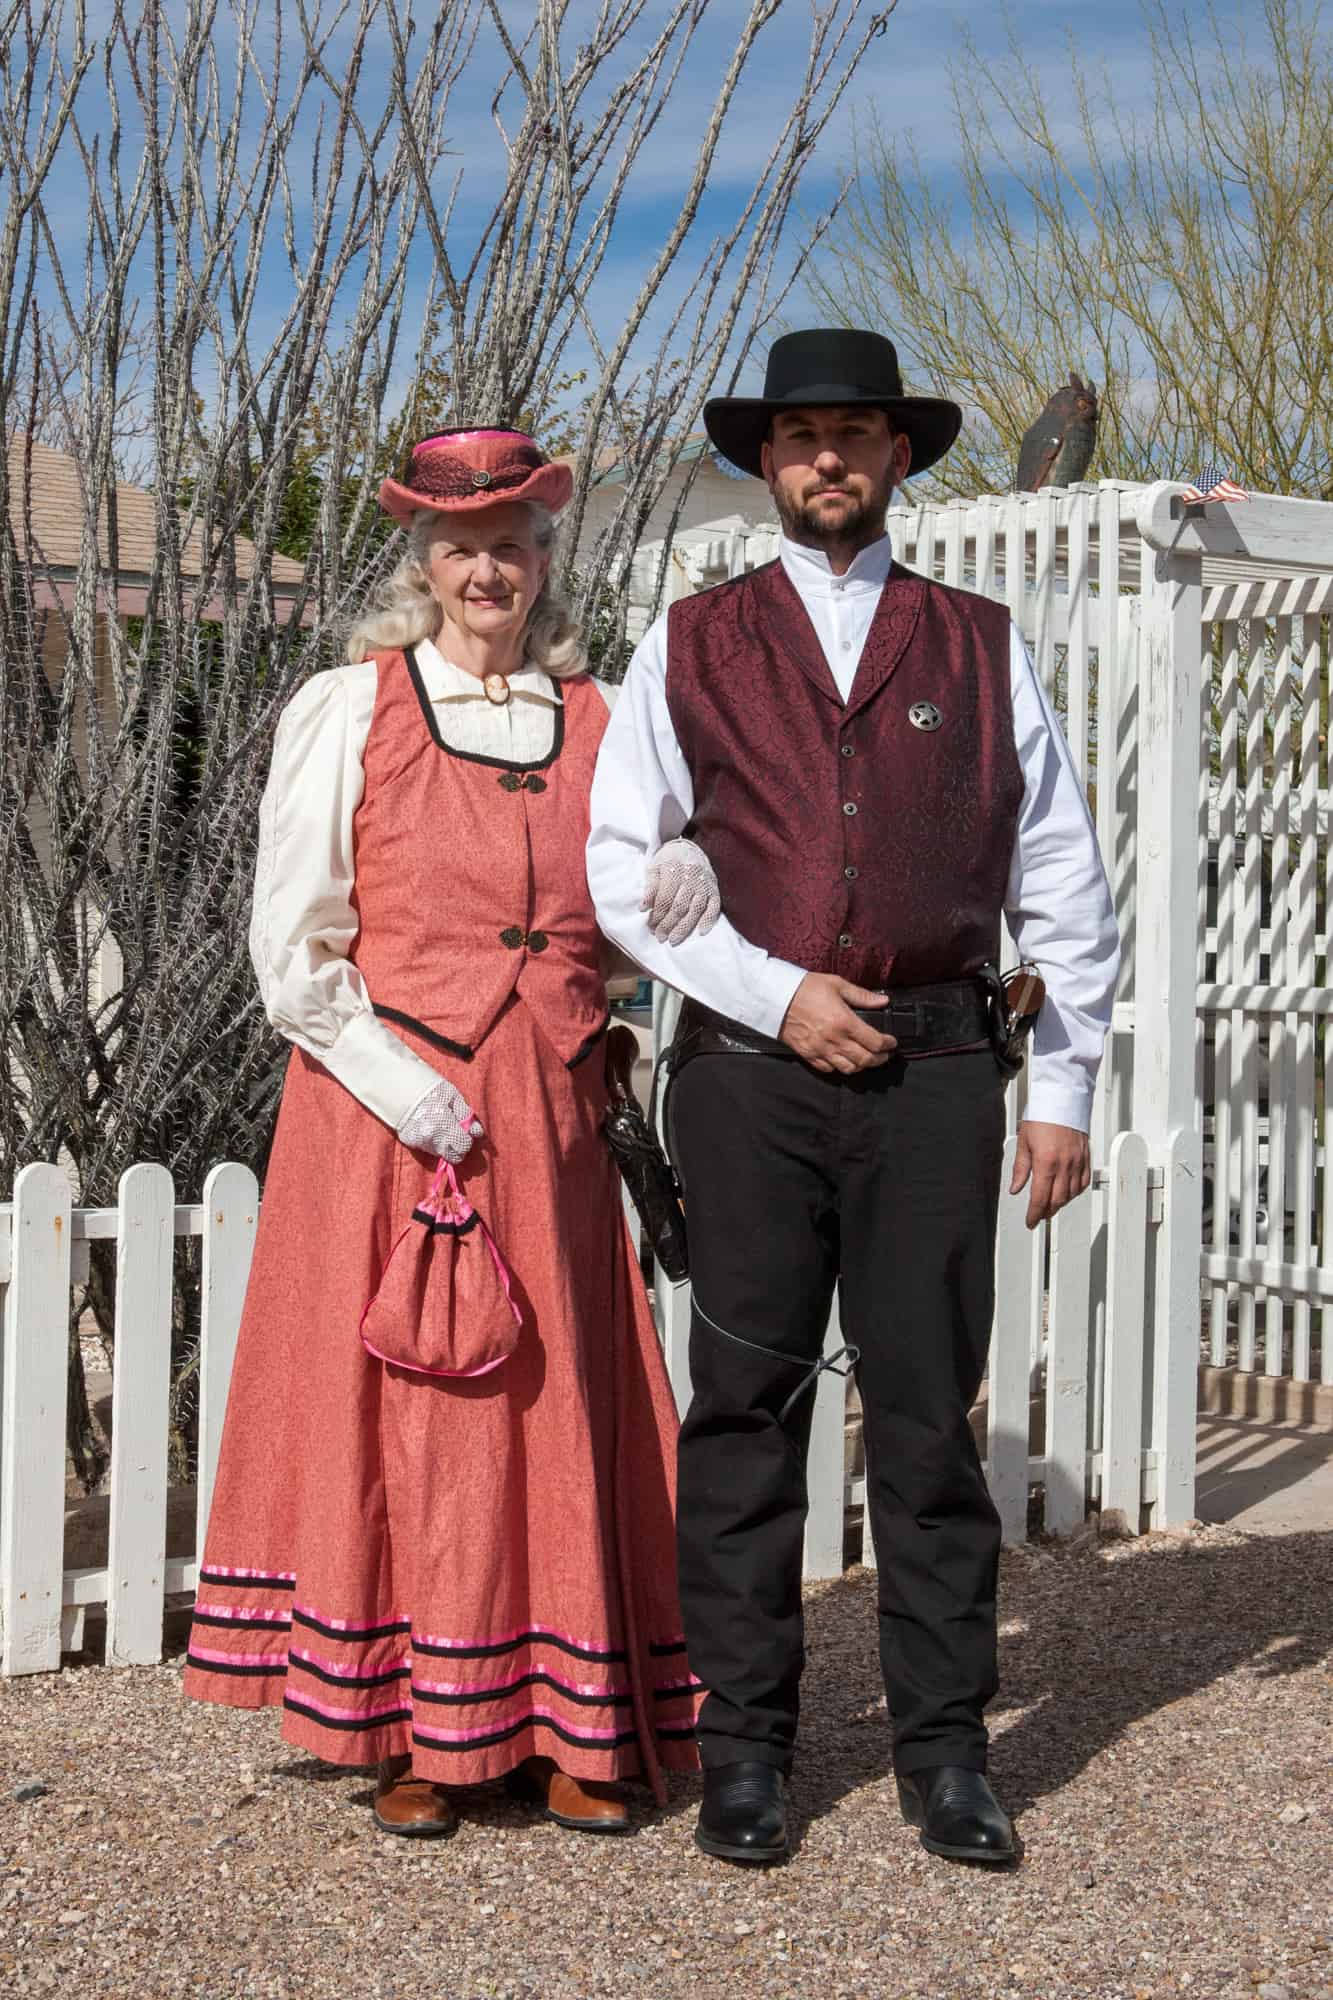 John from traveling in focus along with his mother Norma dress in period wear to look like they belong in the Old West